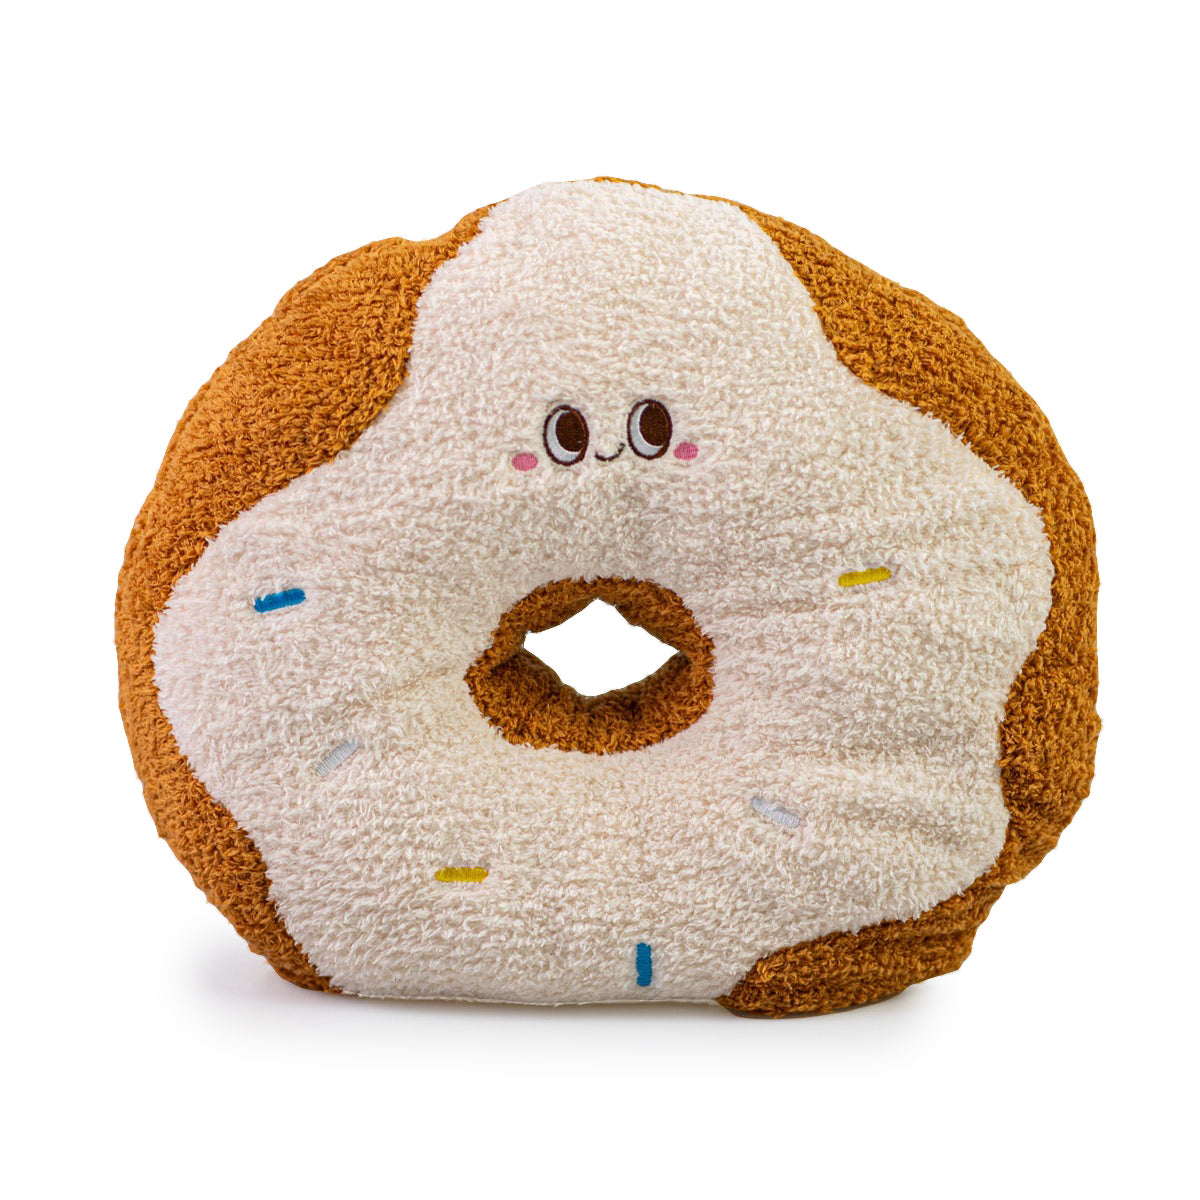 MINISO HAPPY FOODS COLLECTION 14IN. DONUT PLUSH TOY (NUDE COLOR) 2014287210104 REGULAR PLUSH